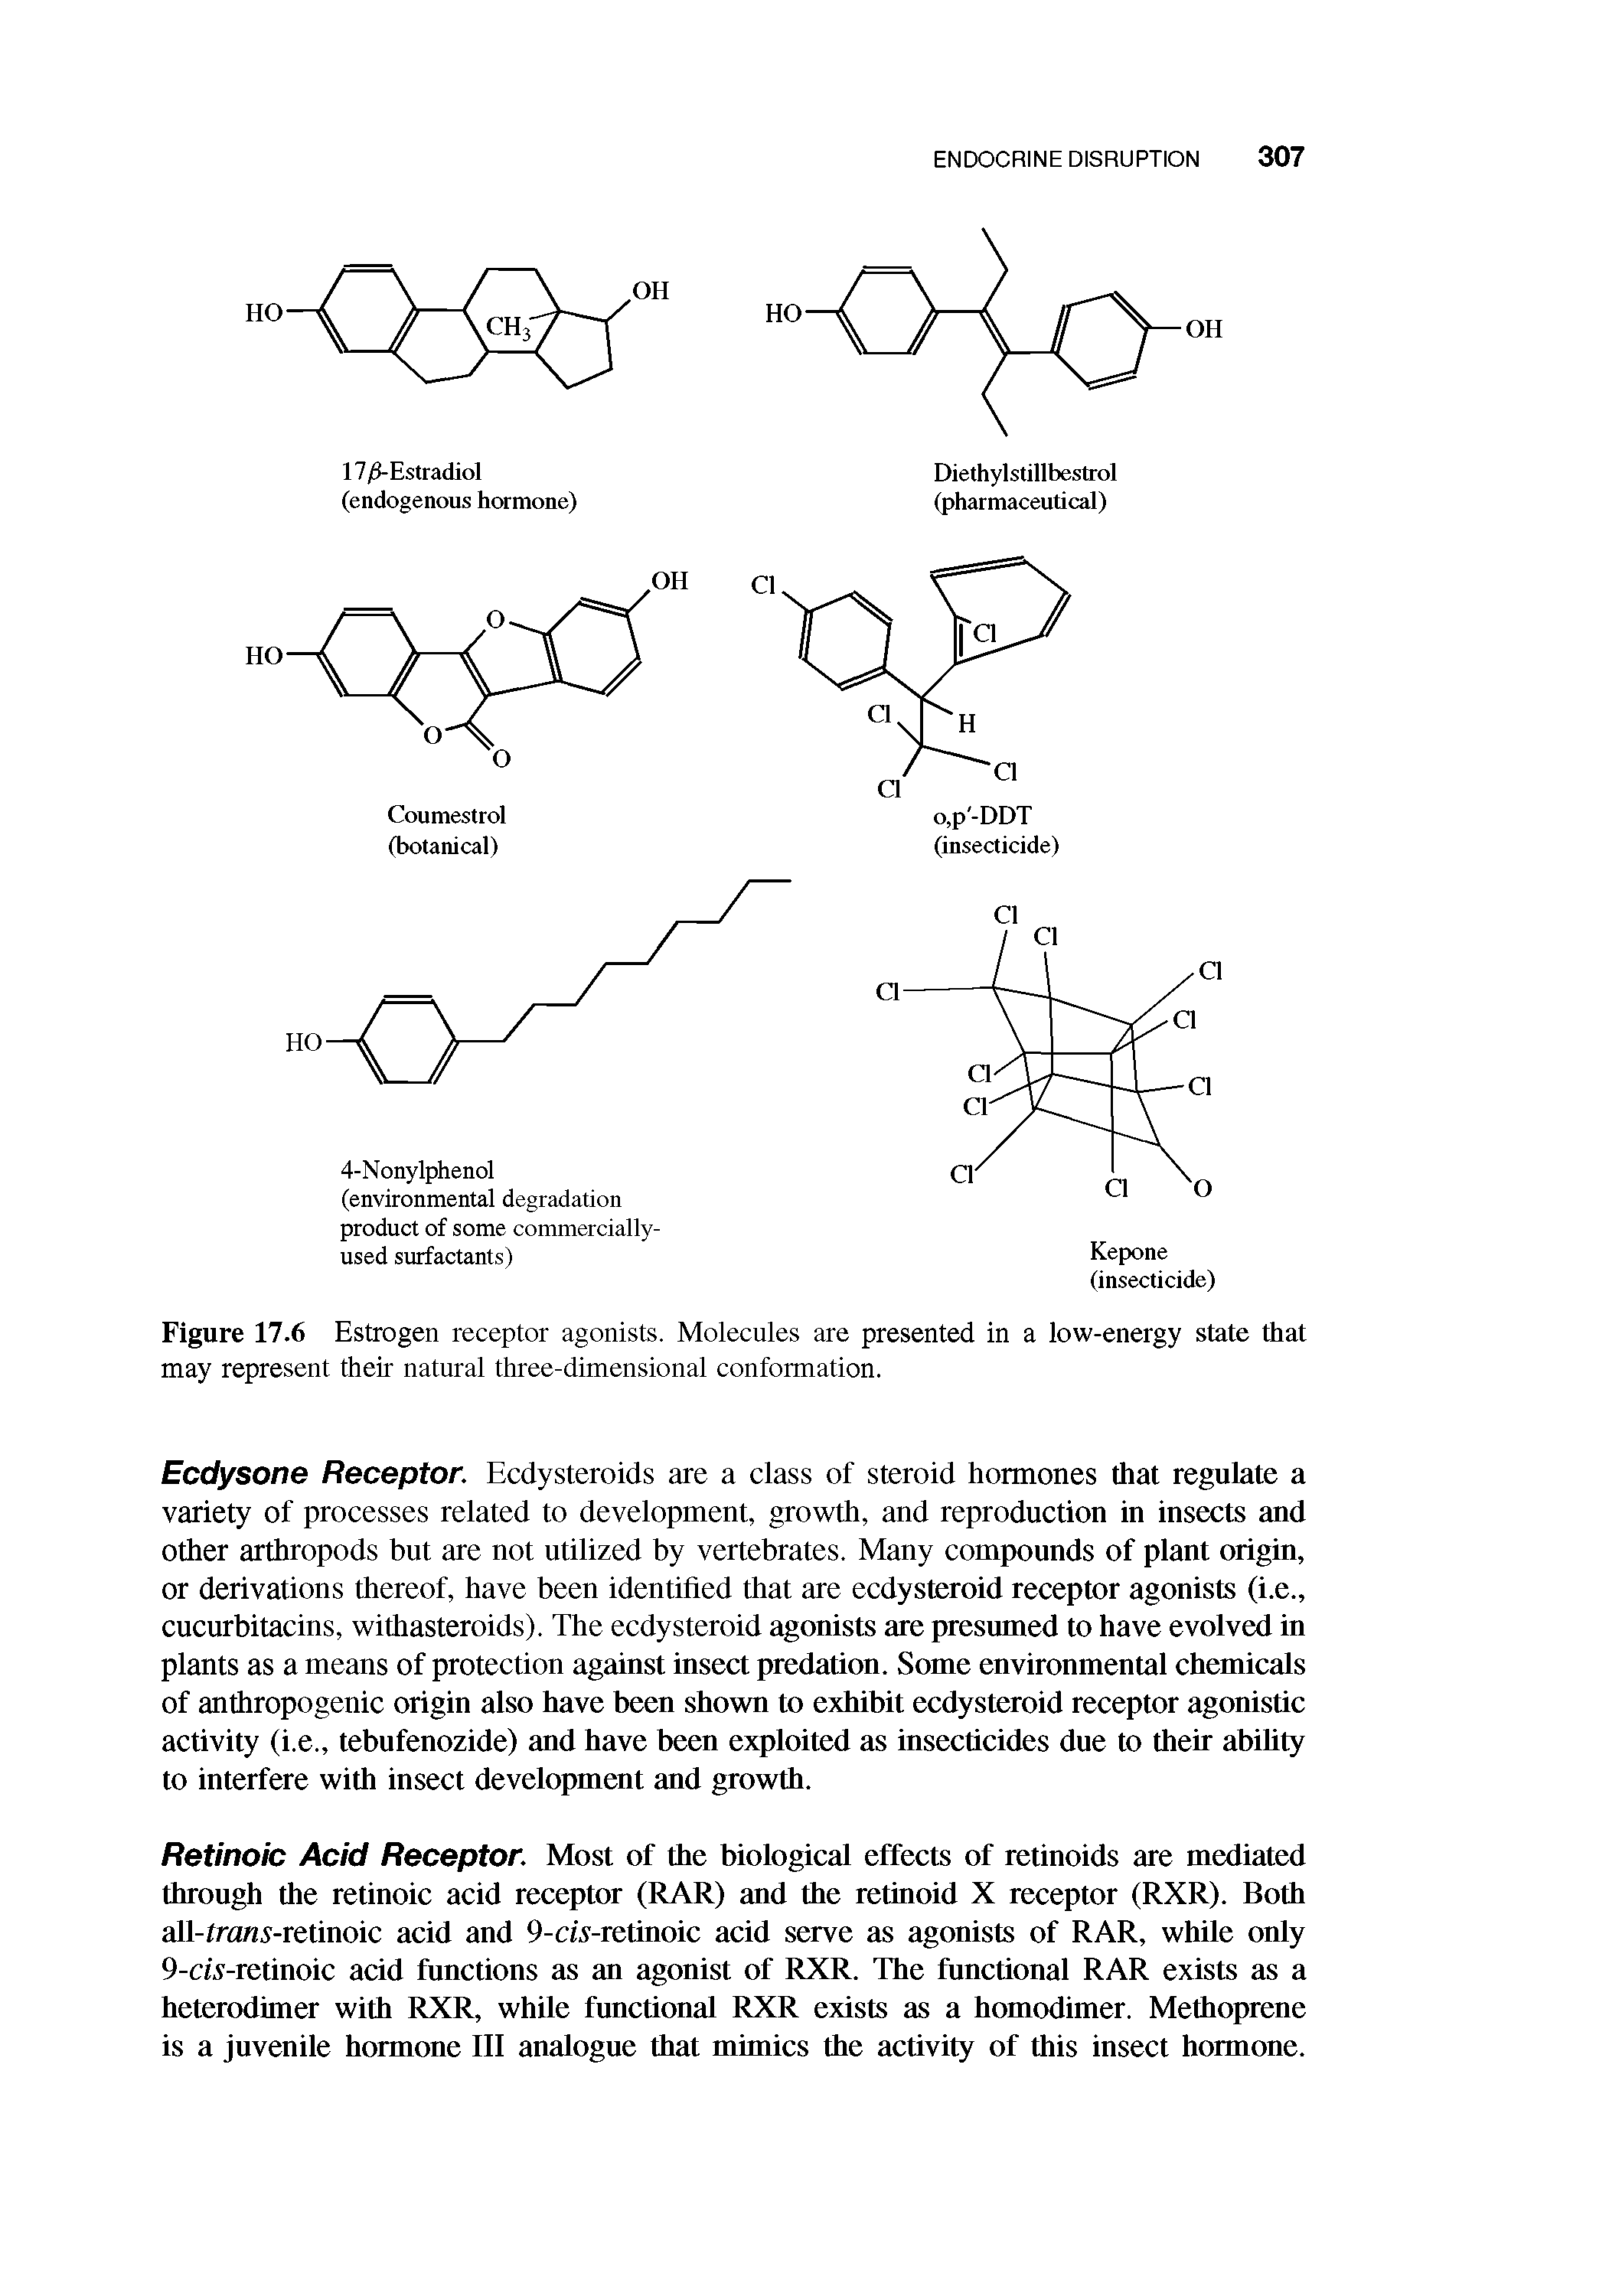 Figure 17.6 Estrogen receptor agonists. Molecules are presented in a low-energy state that may represent their natural three-dimensional conformation.